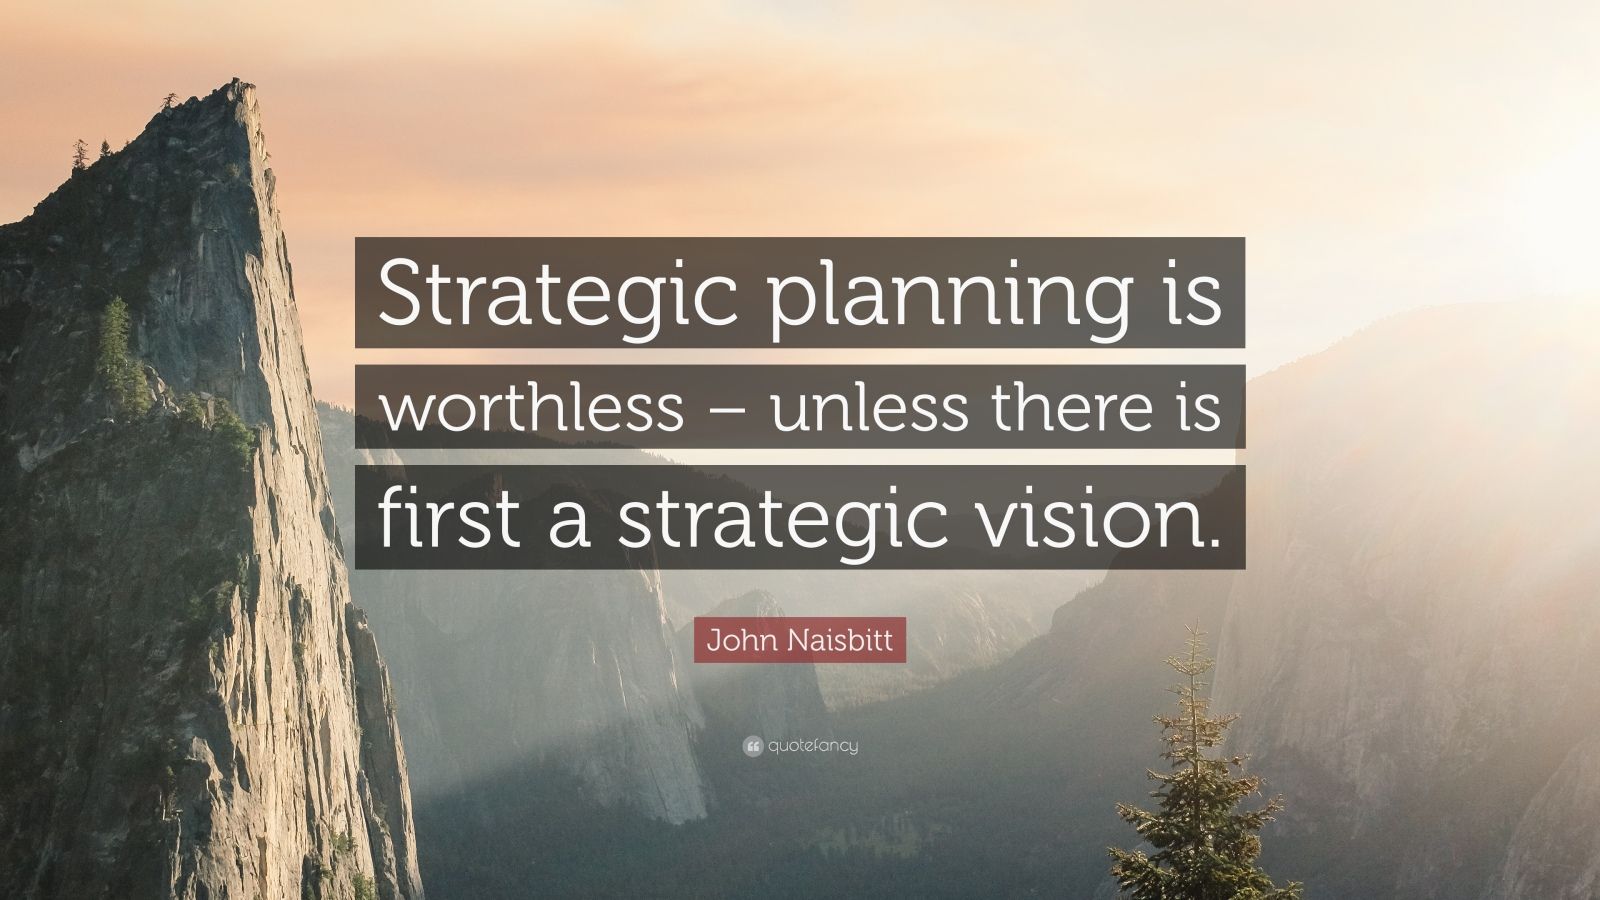 John Naisbitt Quote: “Strategic planning is worthless – unless there is